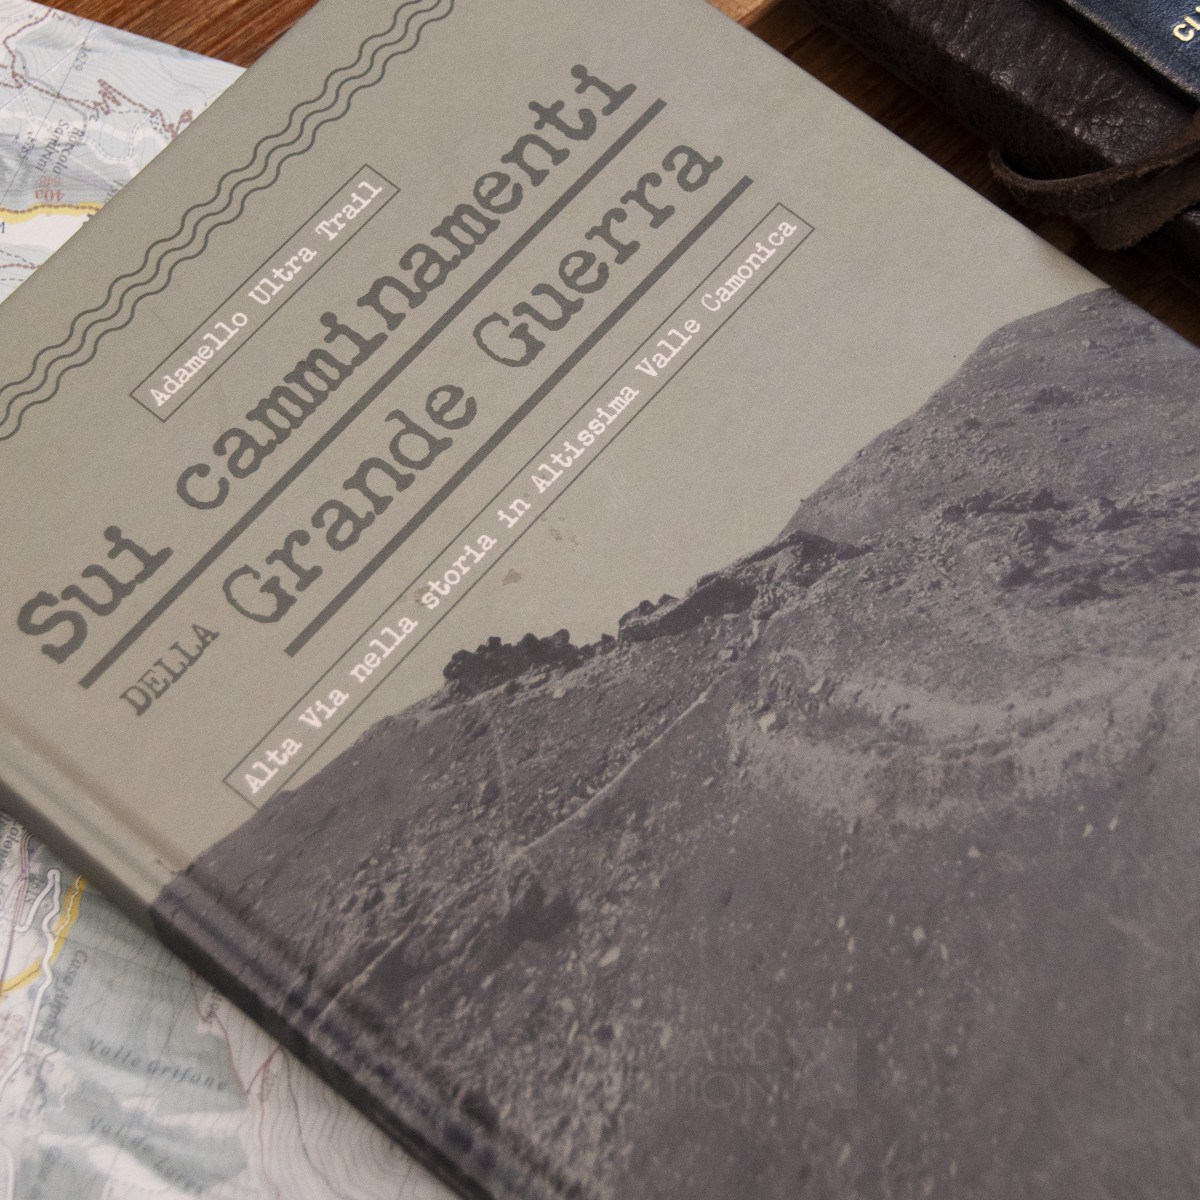 Martino Spreafico wins Iron at the prestigious A' Print and Published Media Design Award with WWI Cultural Trail Map Book.